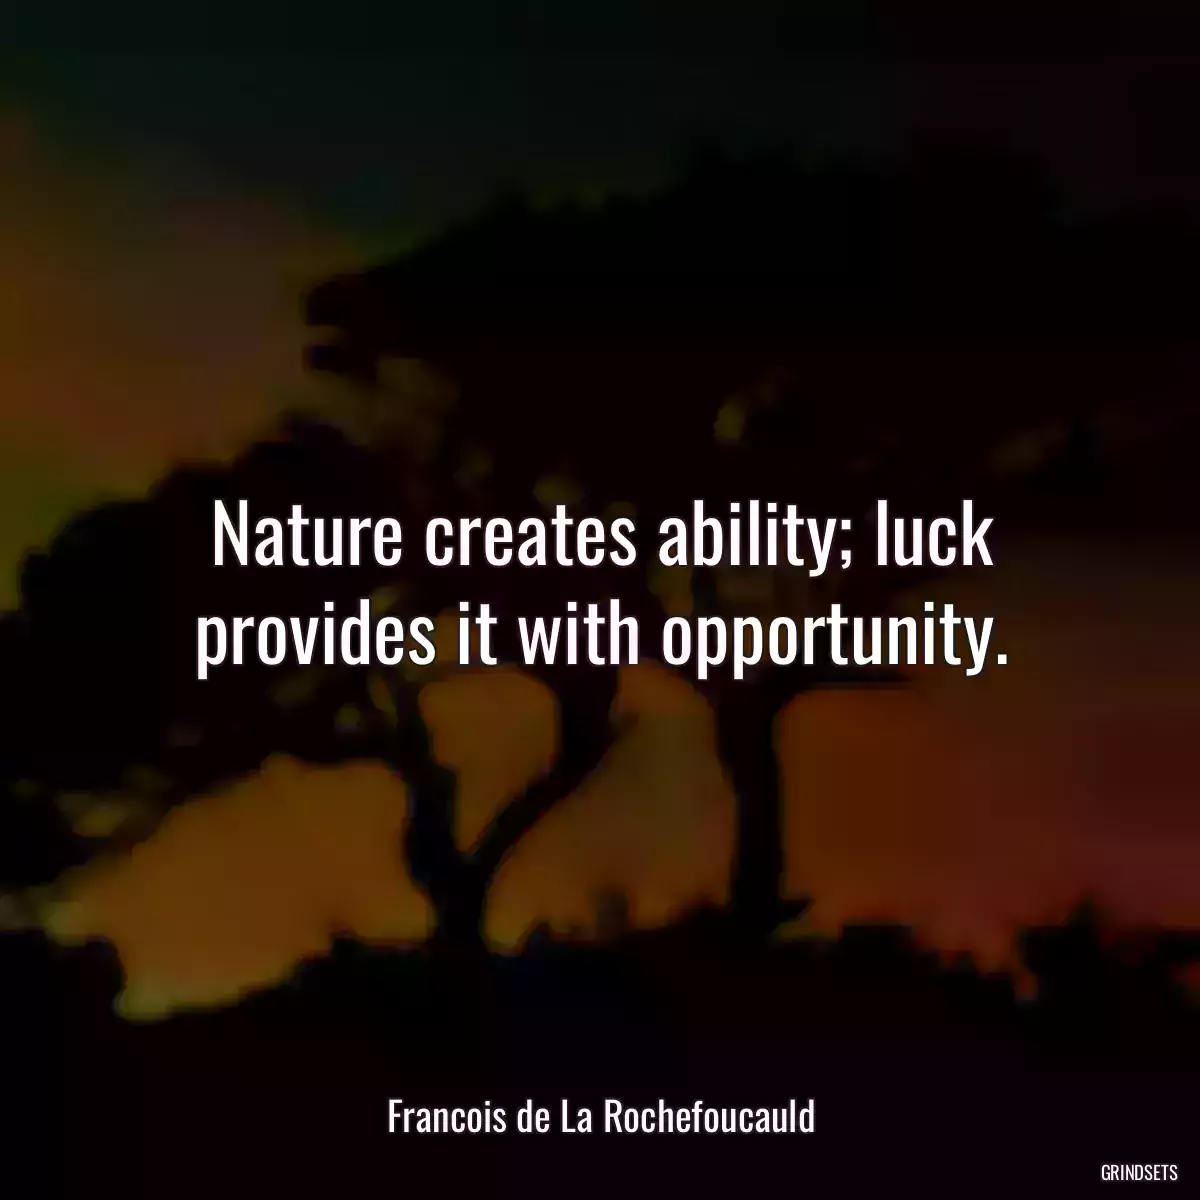 Nature creates ability; luck provides it with opportunity.